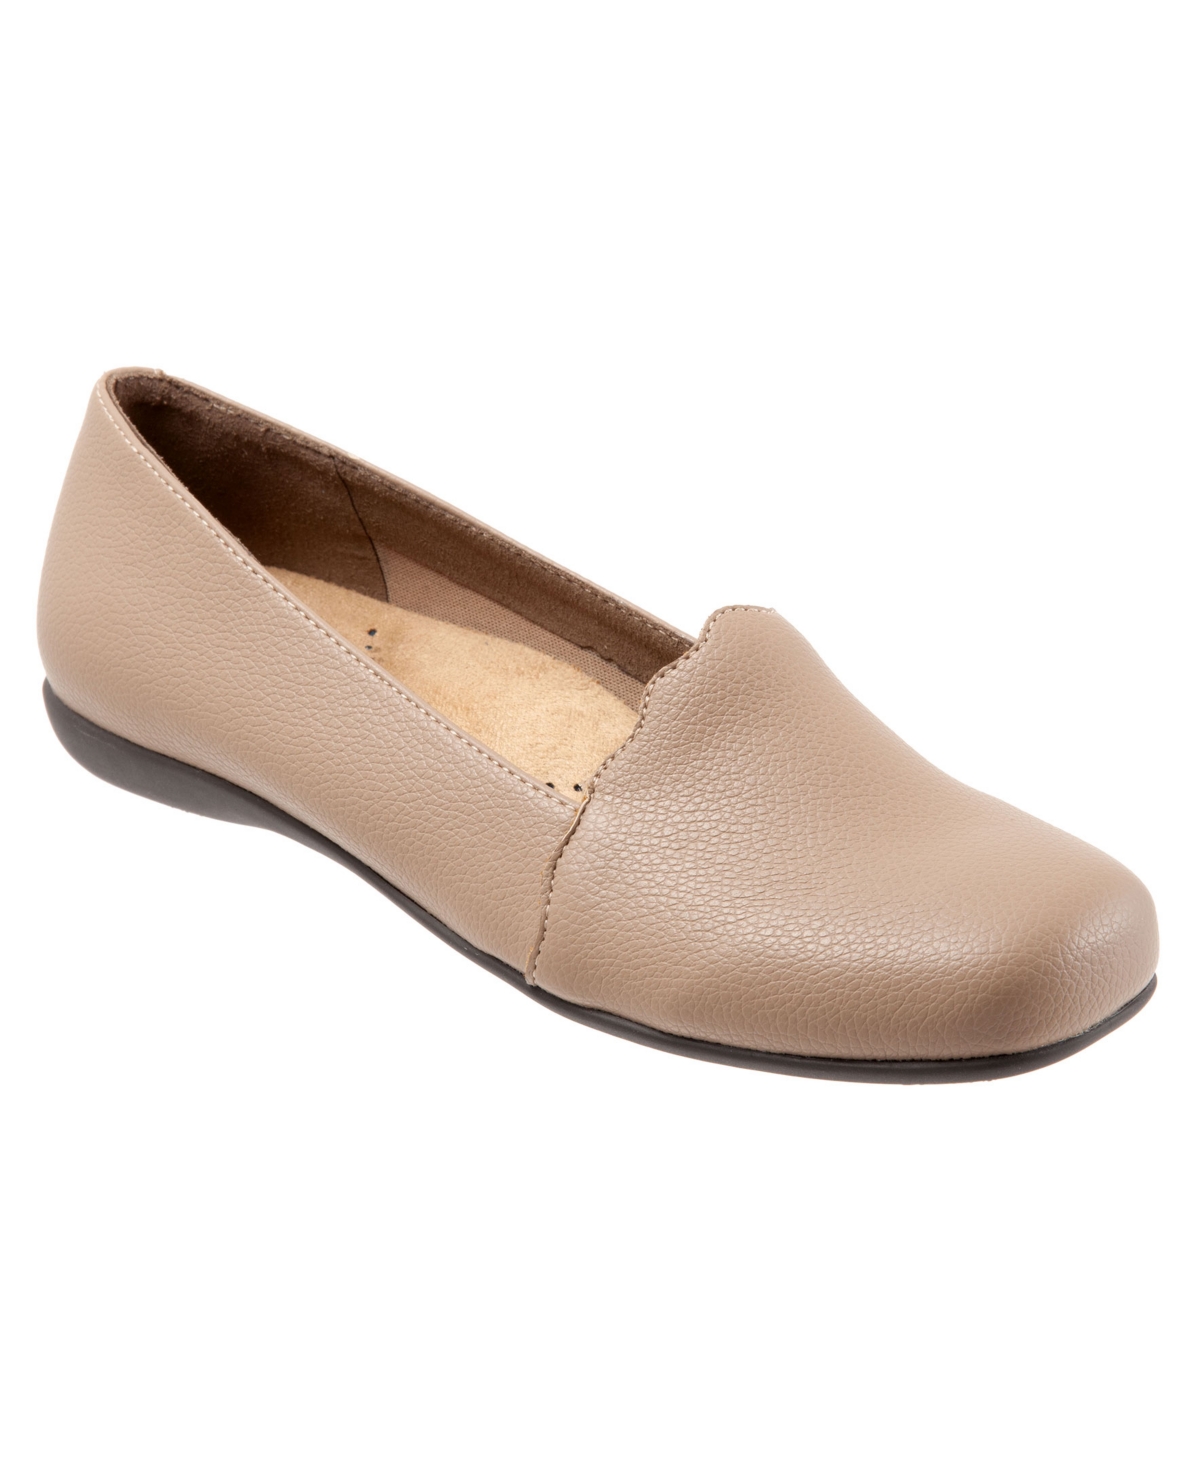 TROTTERS WOMEN'S SAGE LOAFERS